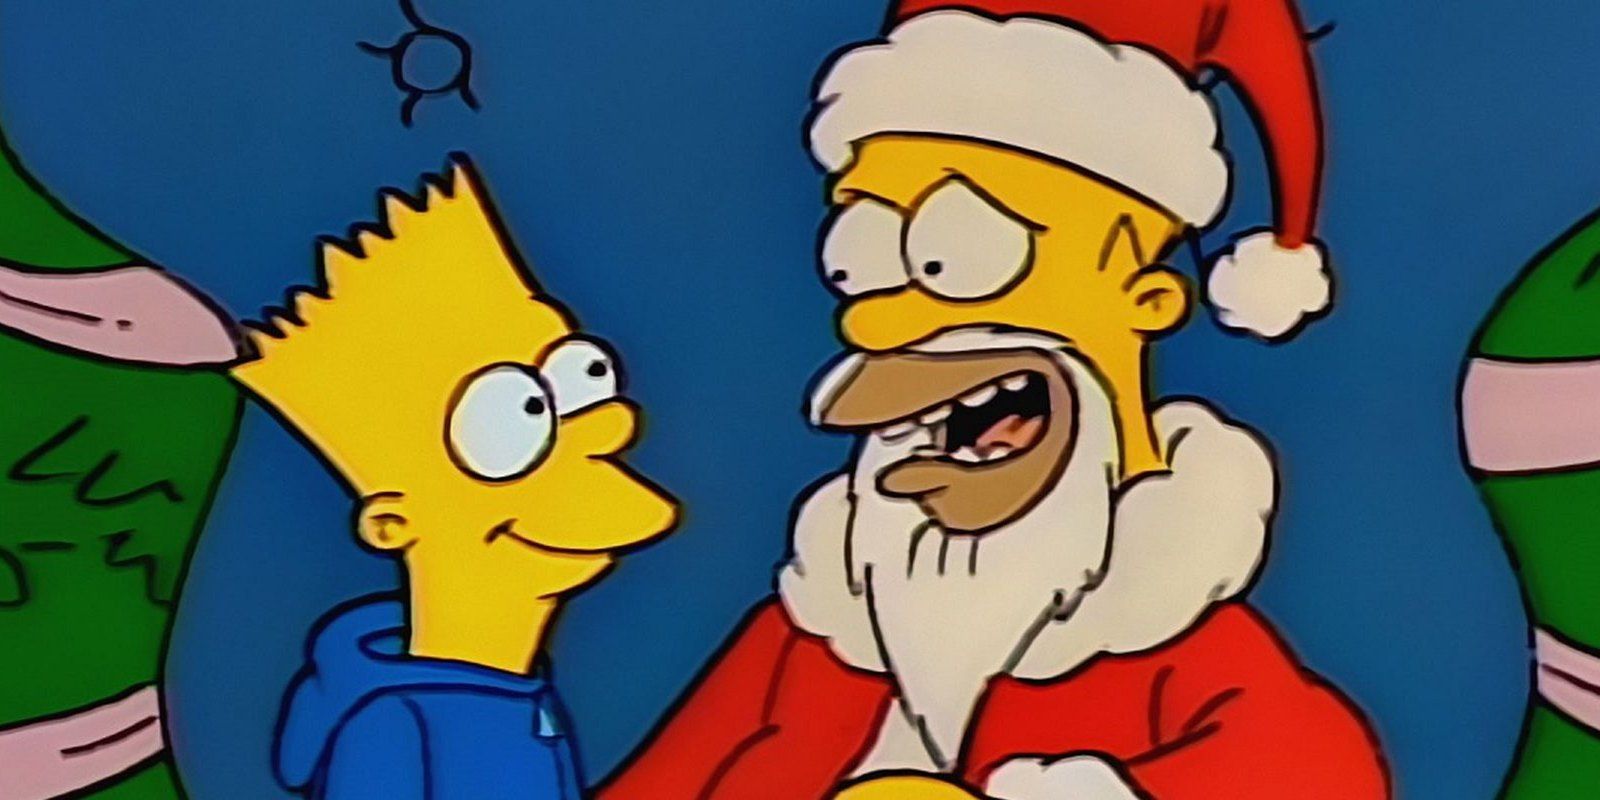 Homer dressed as Santa Claus with Bart in Simpsons Roasting On An Open Fire